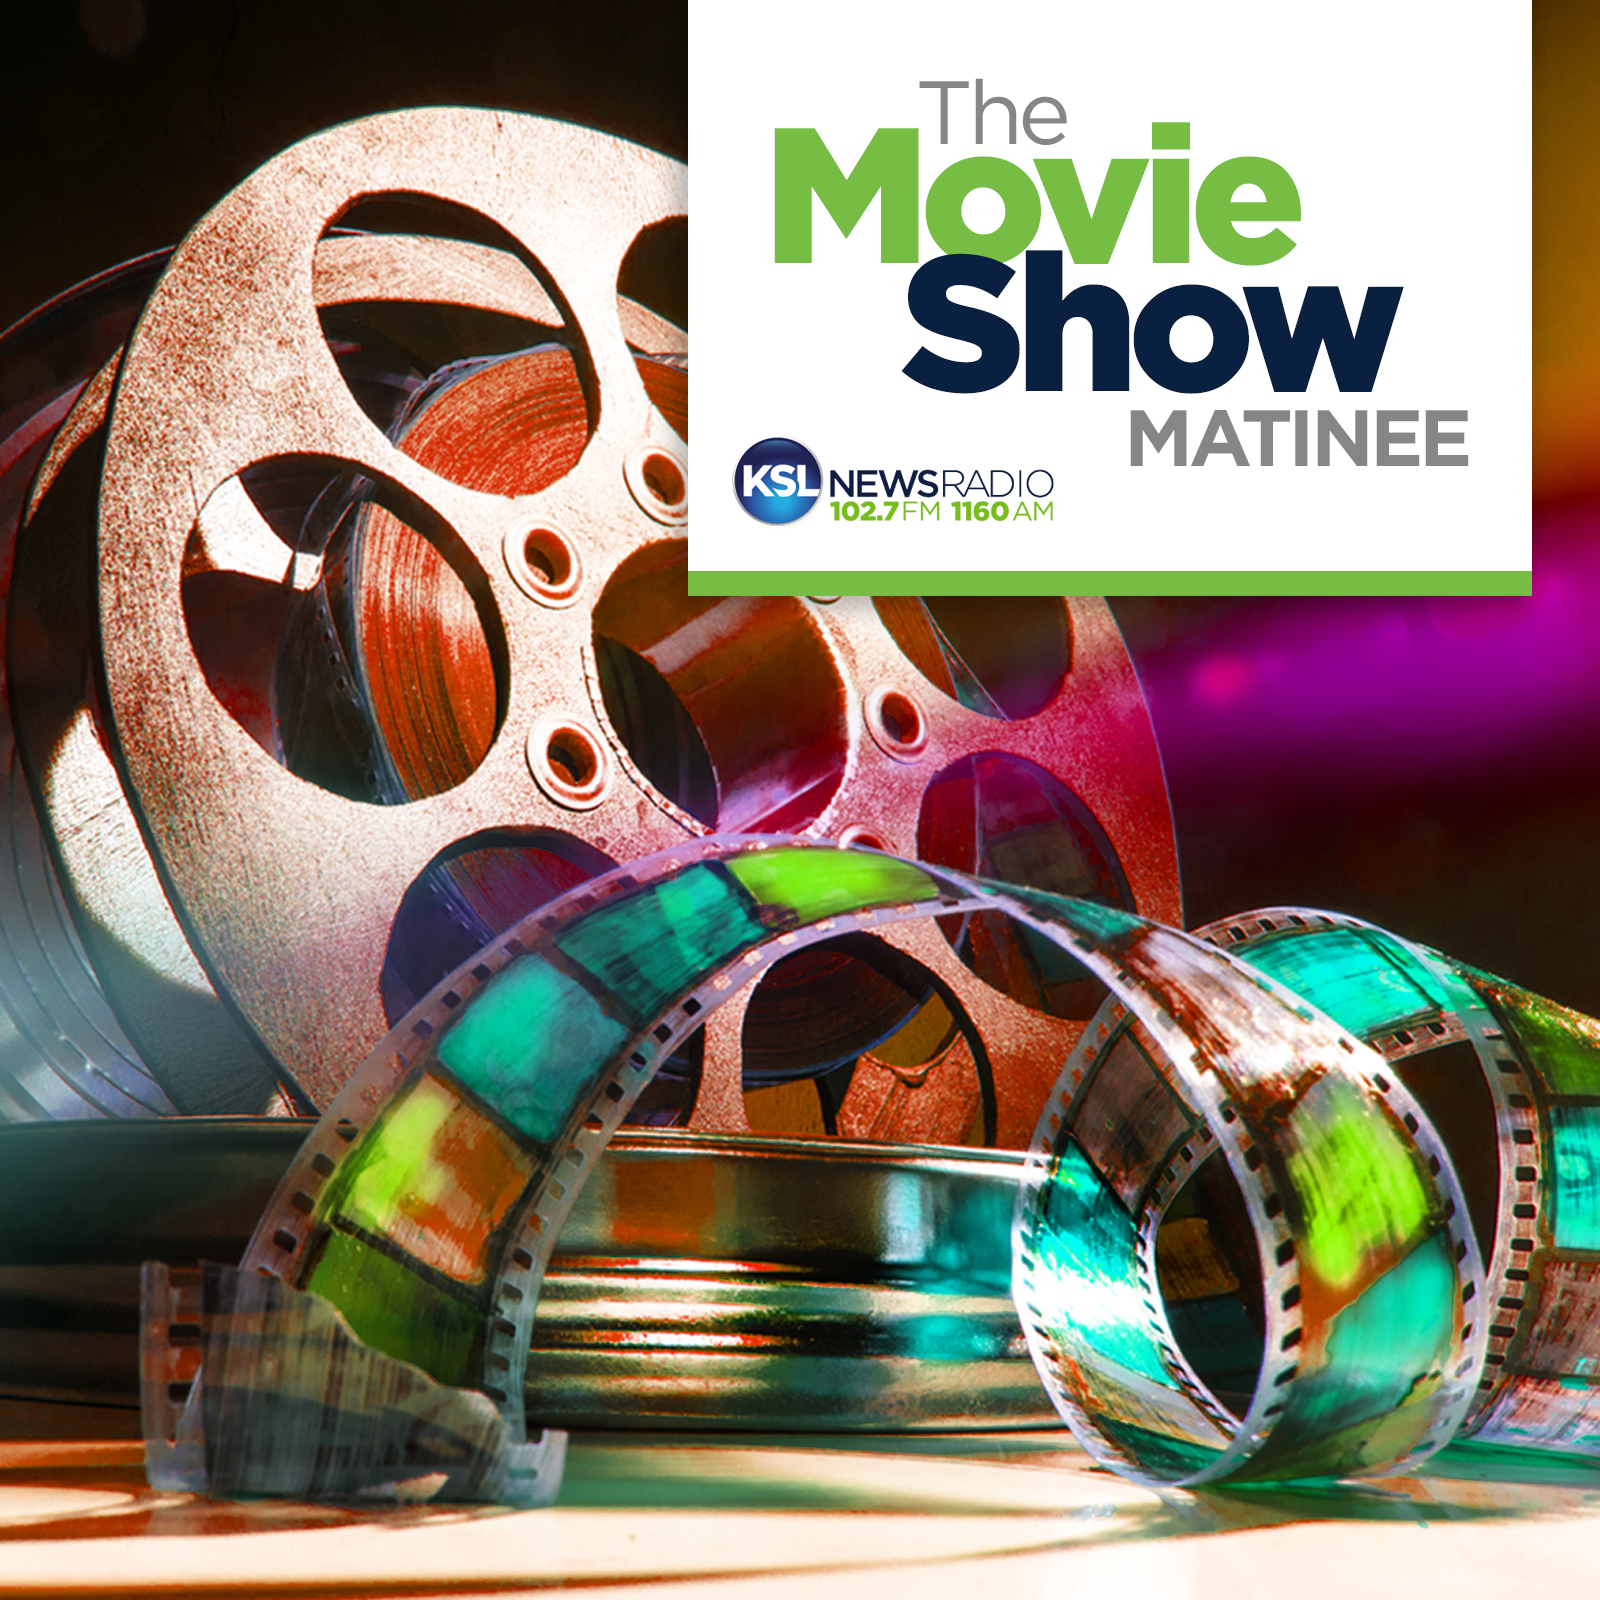 The Movie Show Matinee